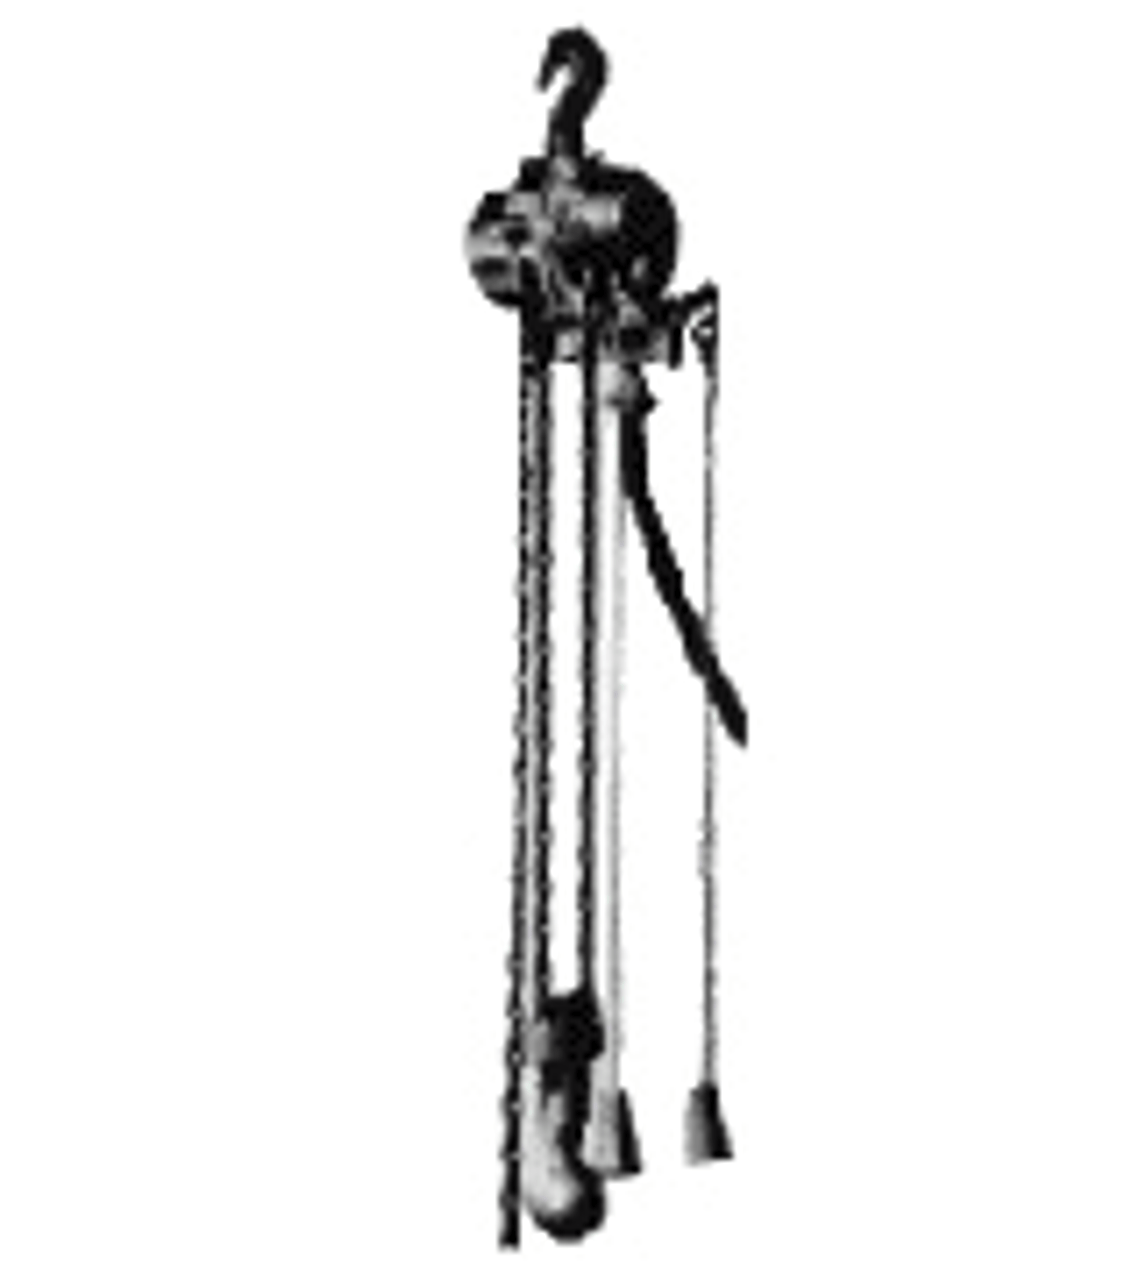 IMPA 591356 Chain hoist pneumatic - 3 ton - 2,8 mtr./min with full load TCR3000C with 3 mtr. chain (lift)-ATEX zone 2 & 22